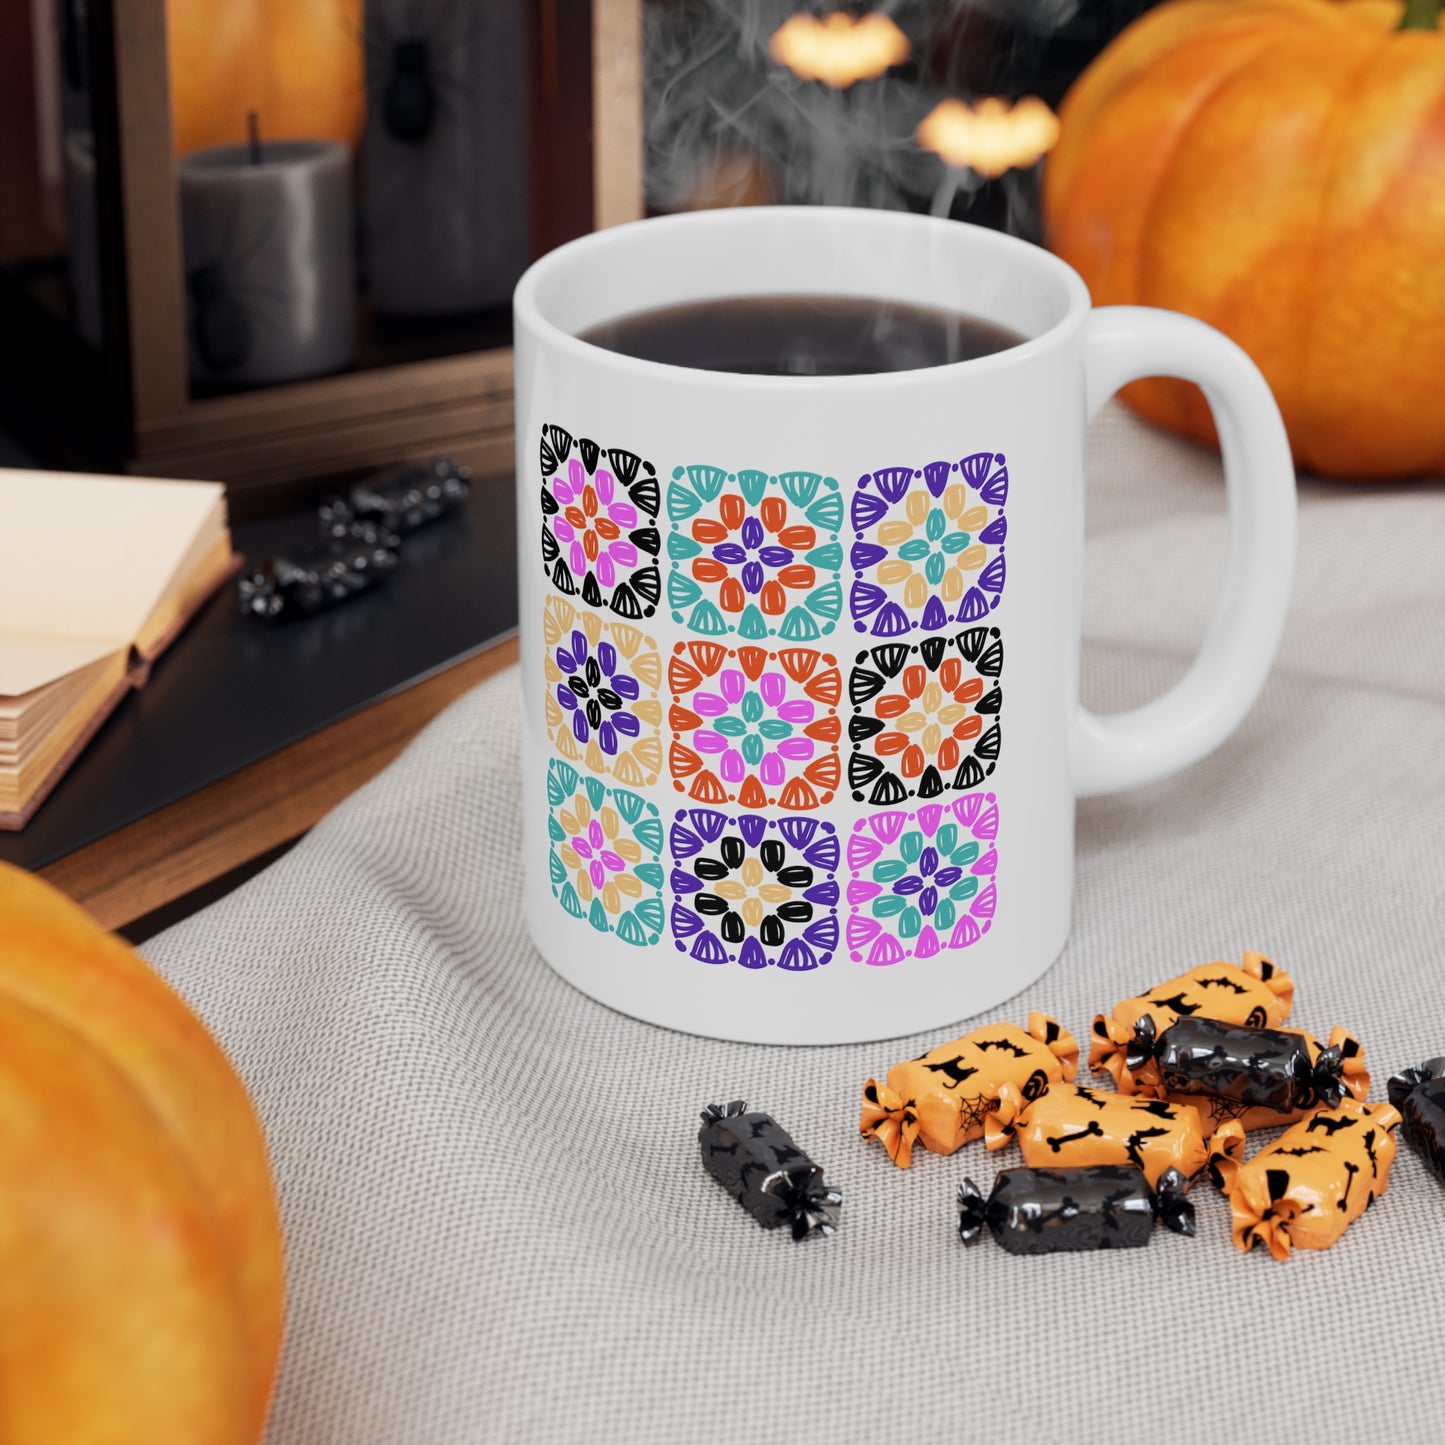 Granny Square Mug, Coffee Cup, Funny Coffee Cup, Crochet Gift, Mother's Day Gift